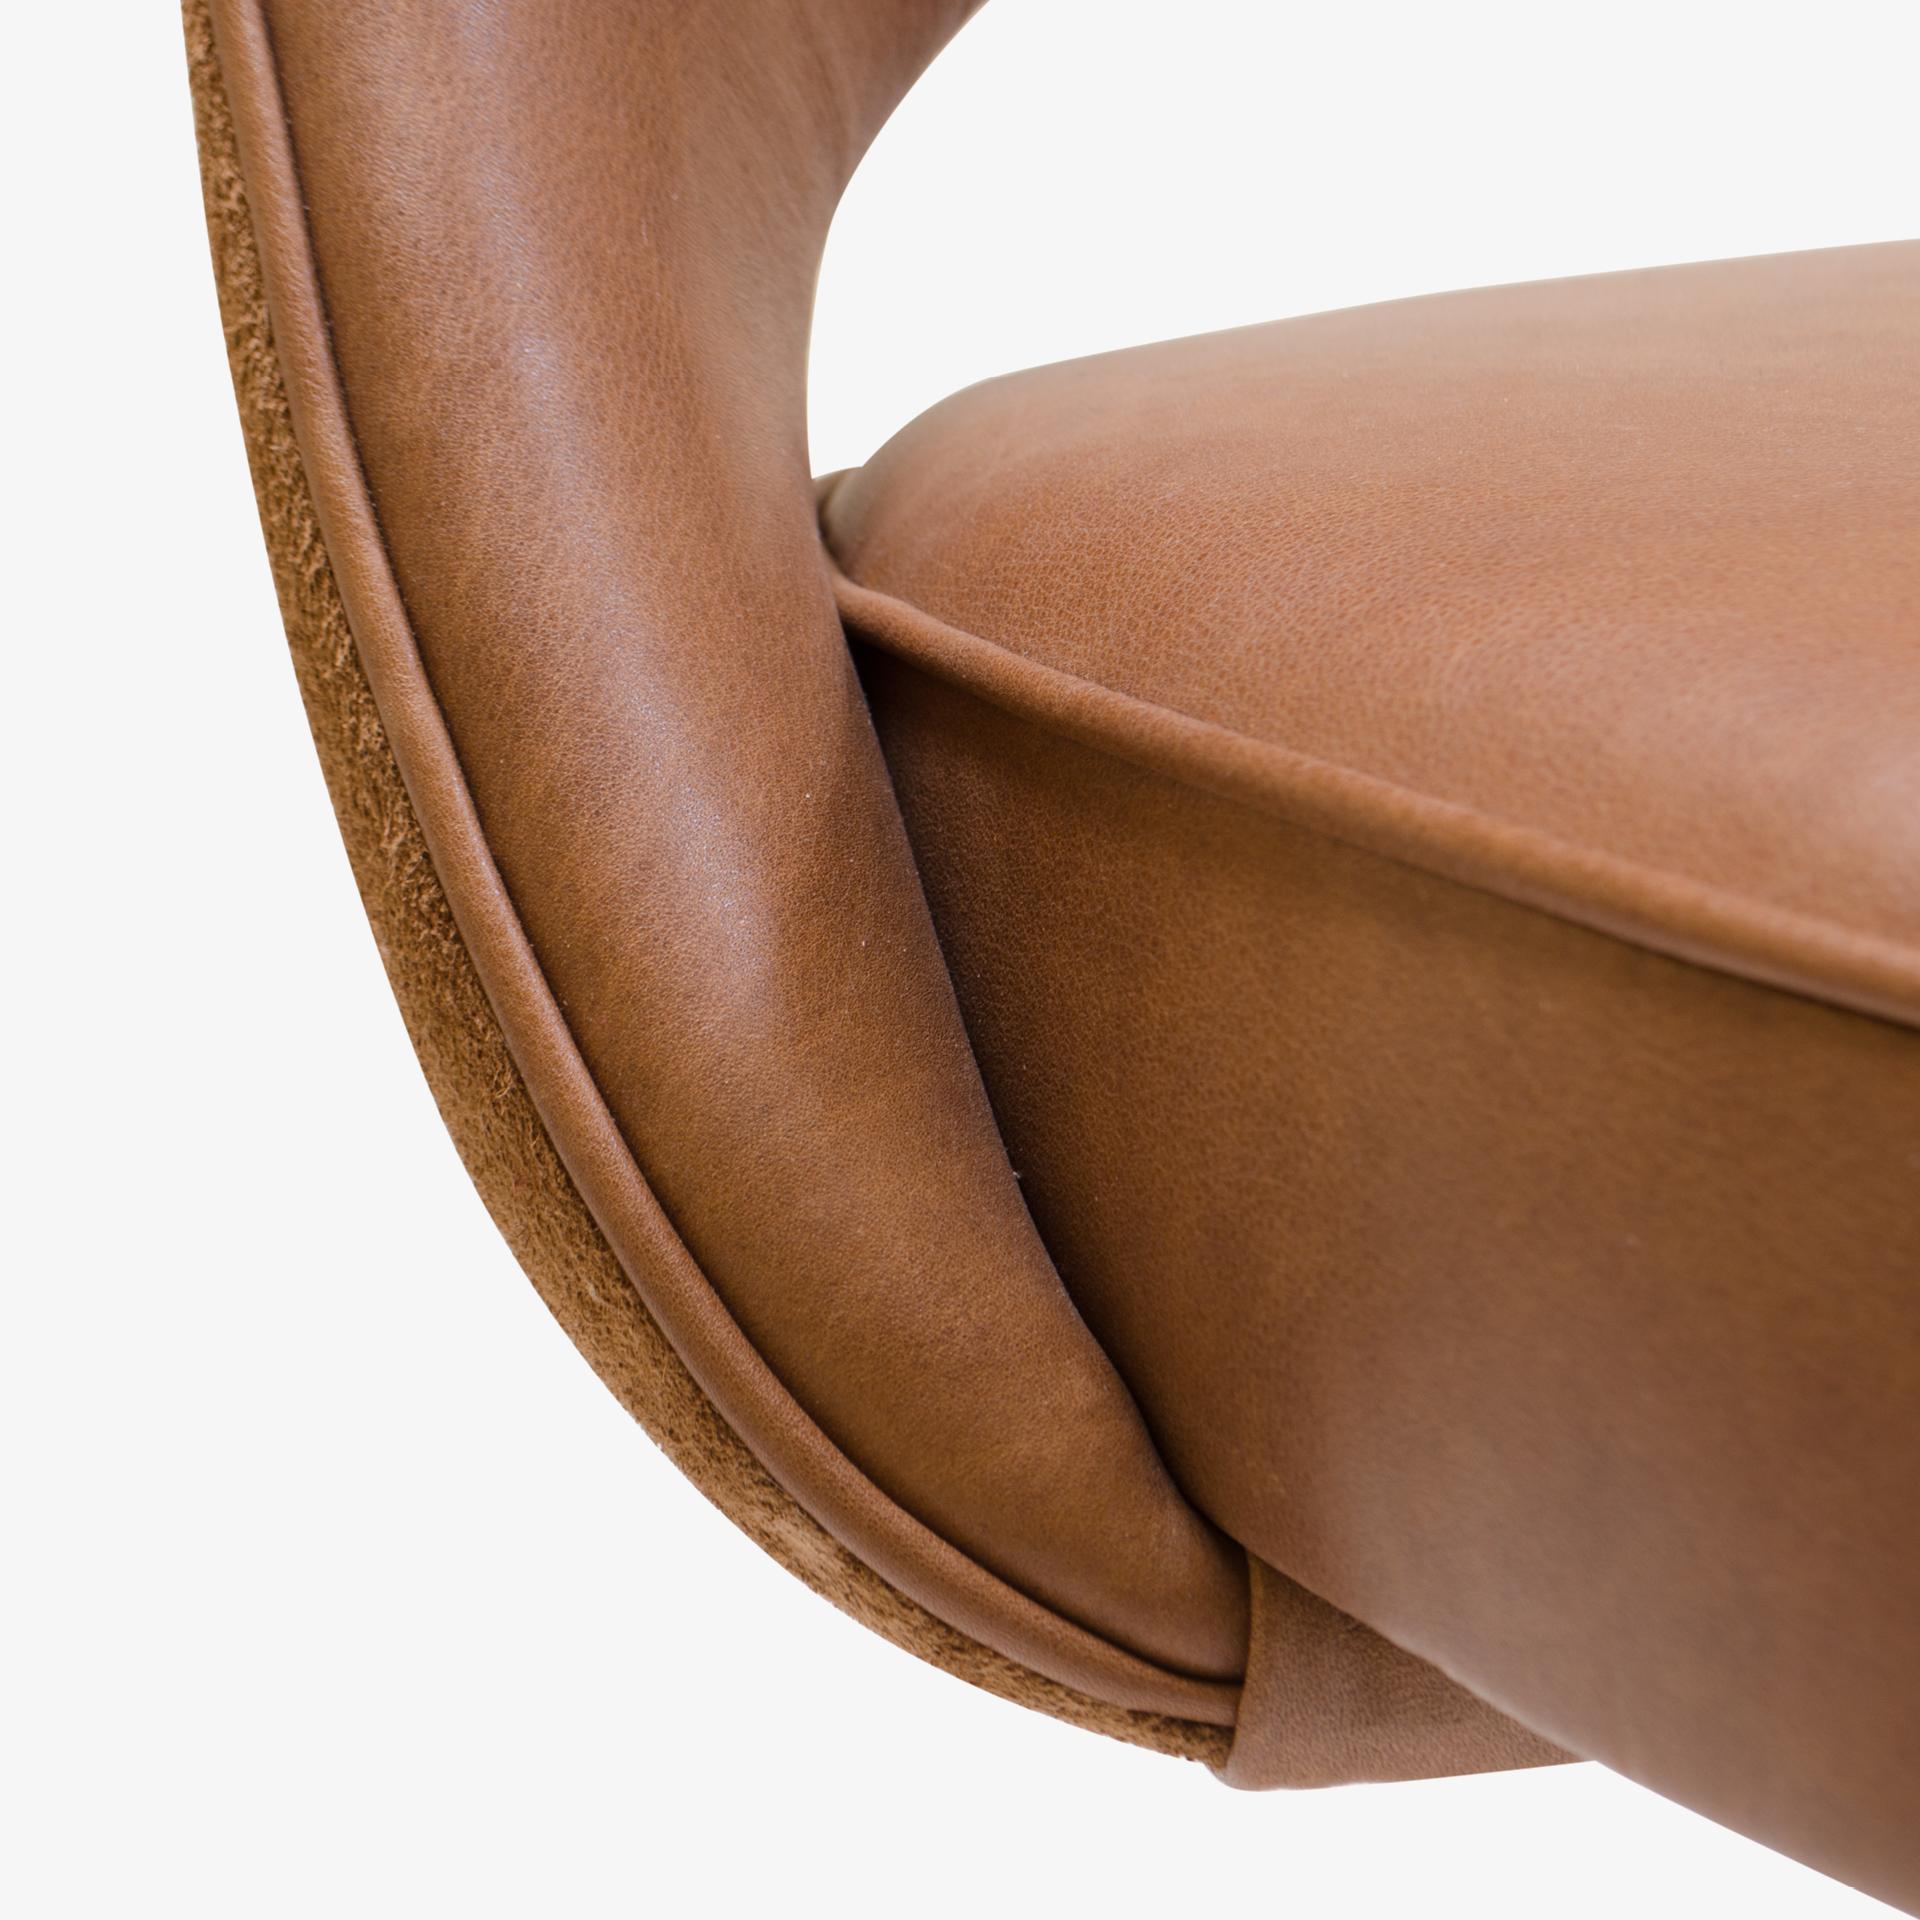 Late 20th Century Saarinen Executive Armless Chair in Leather and Suede, Vintage Swivel Base For Sale